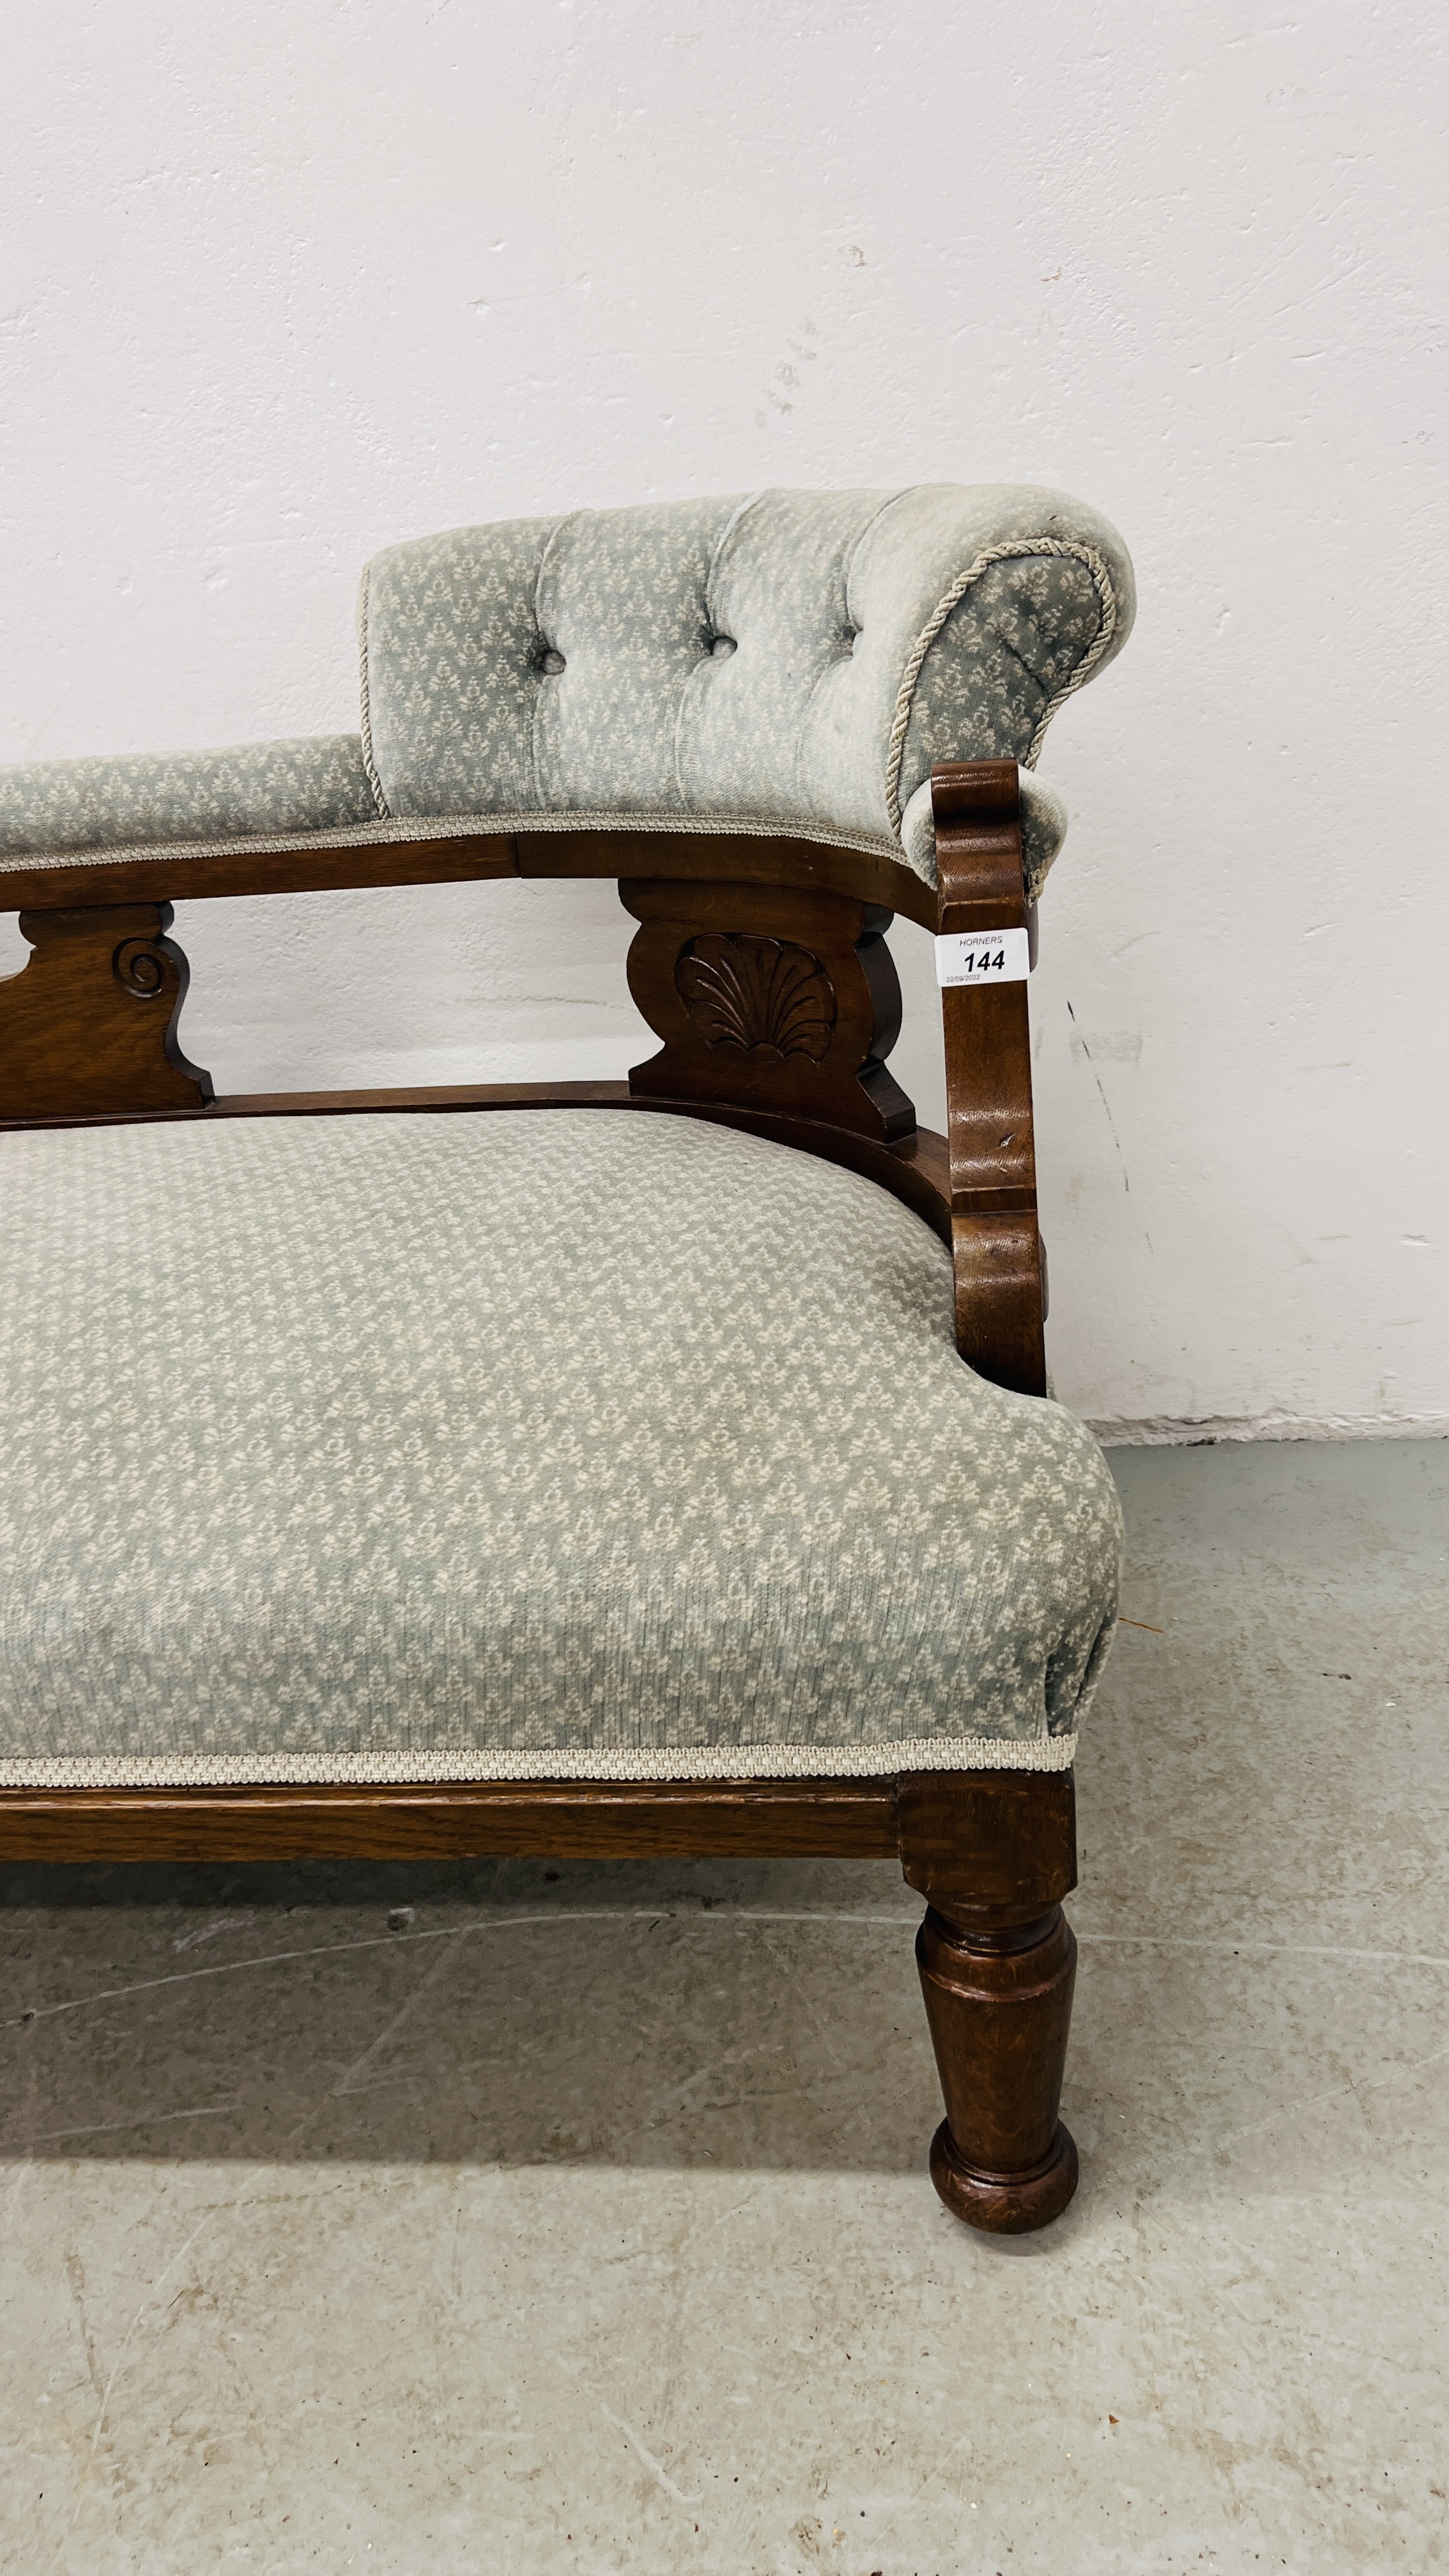 AN EDWARDIAN OAK CHAISE LONGUE UPHOLSTERED IN PASTEL BLUE - Image 2 of 8